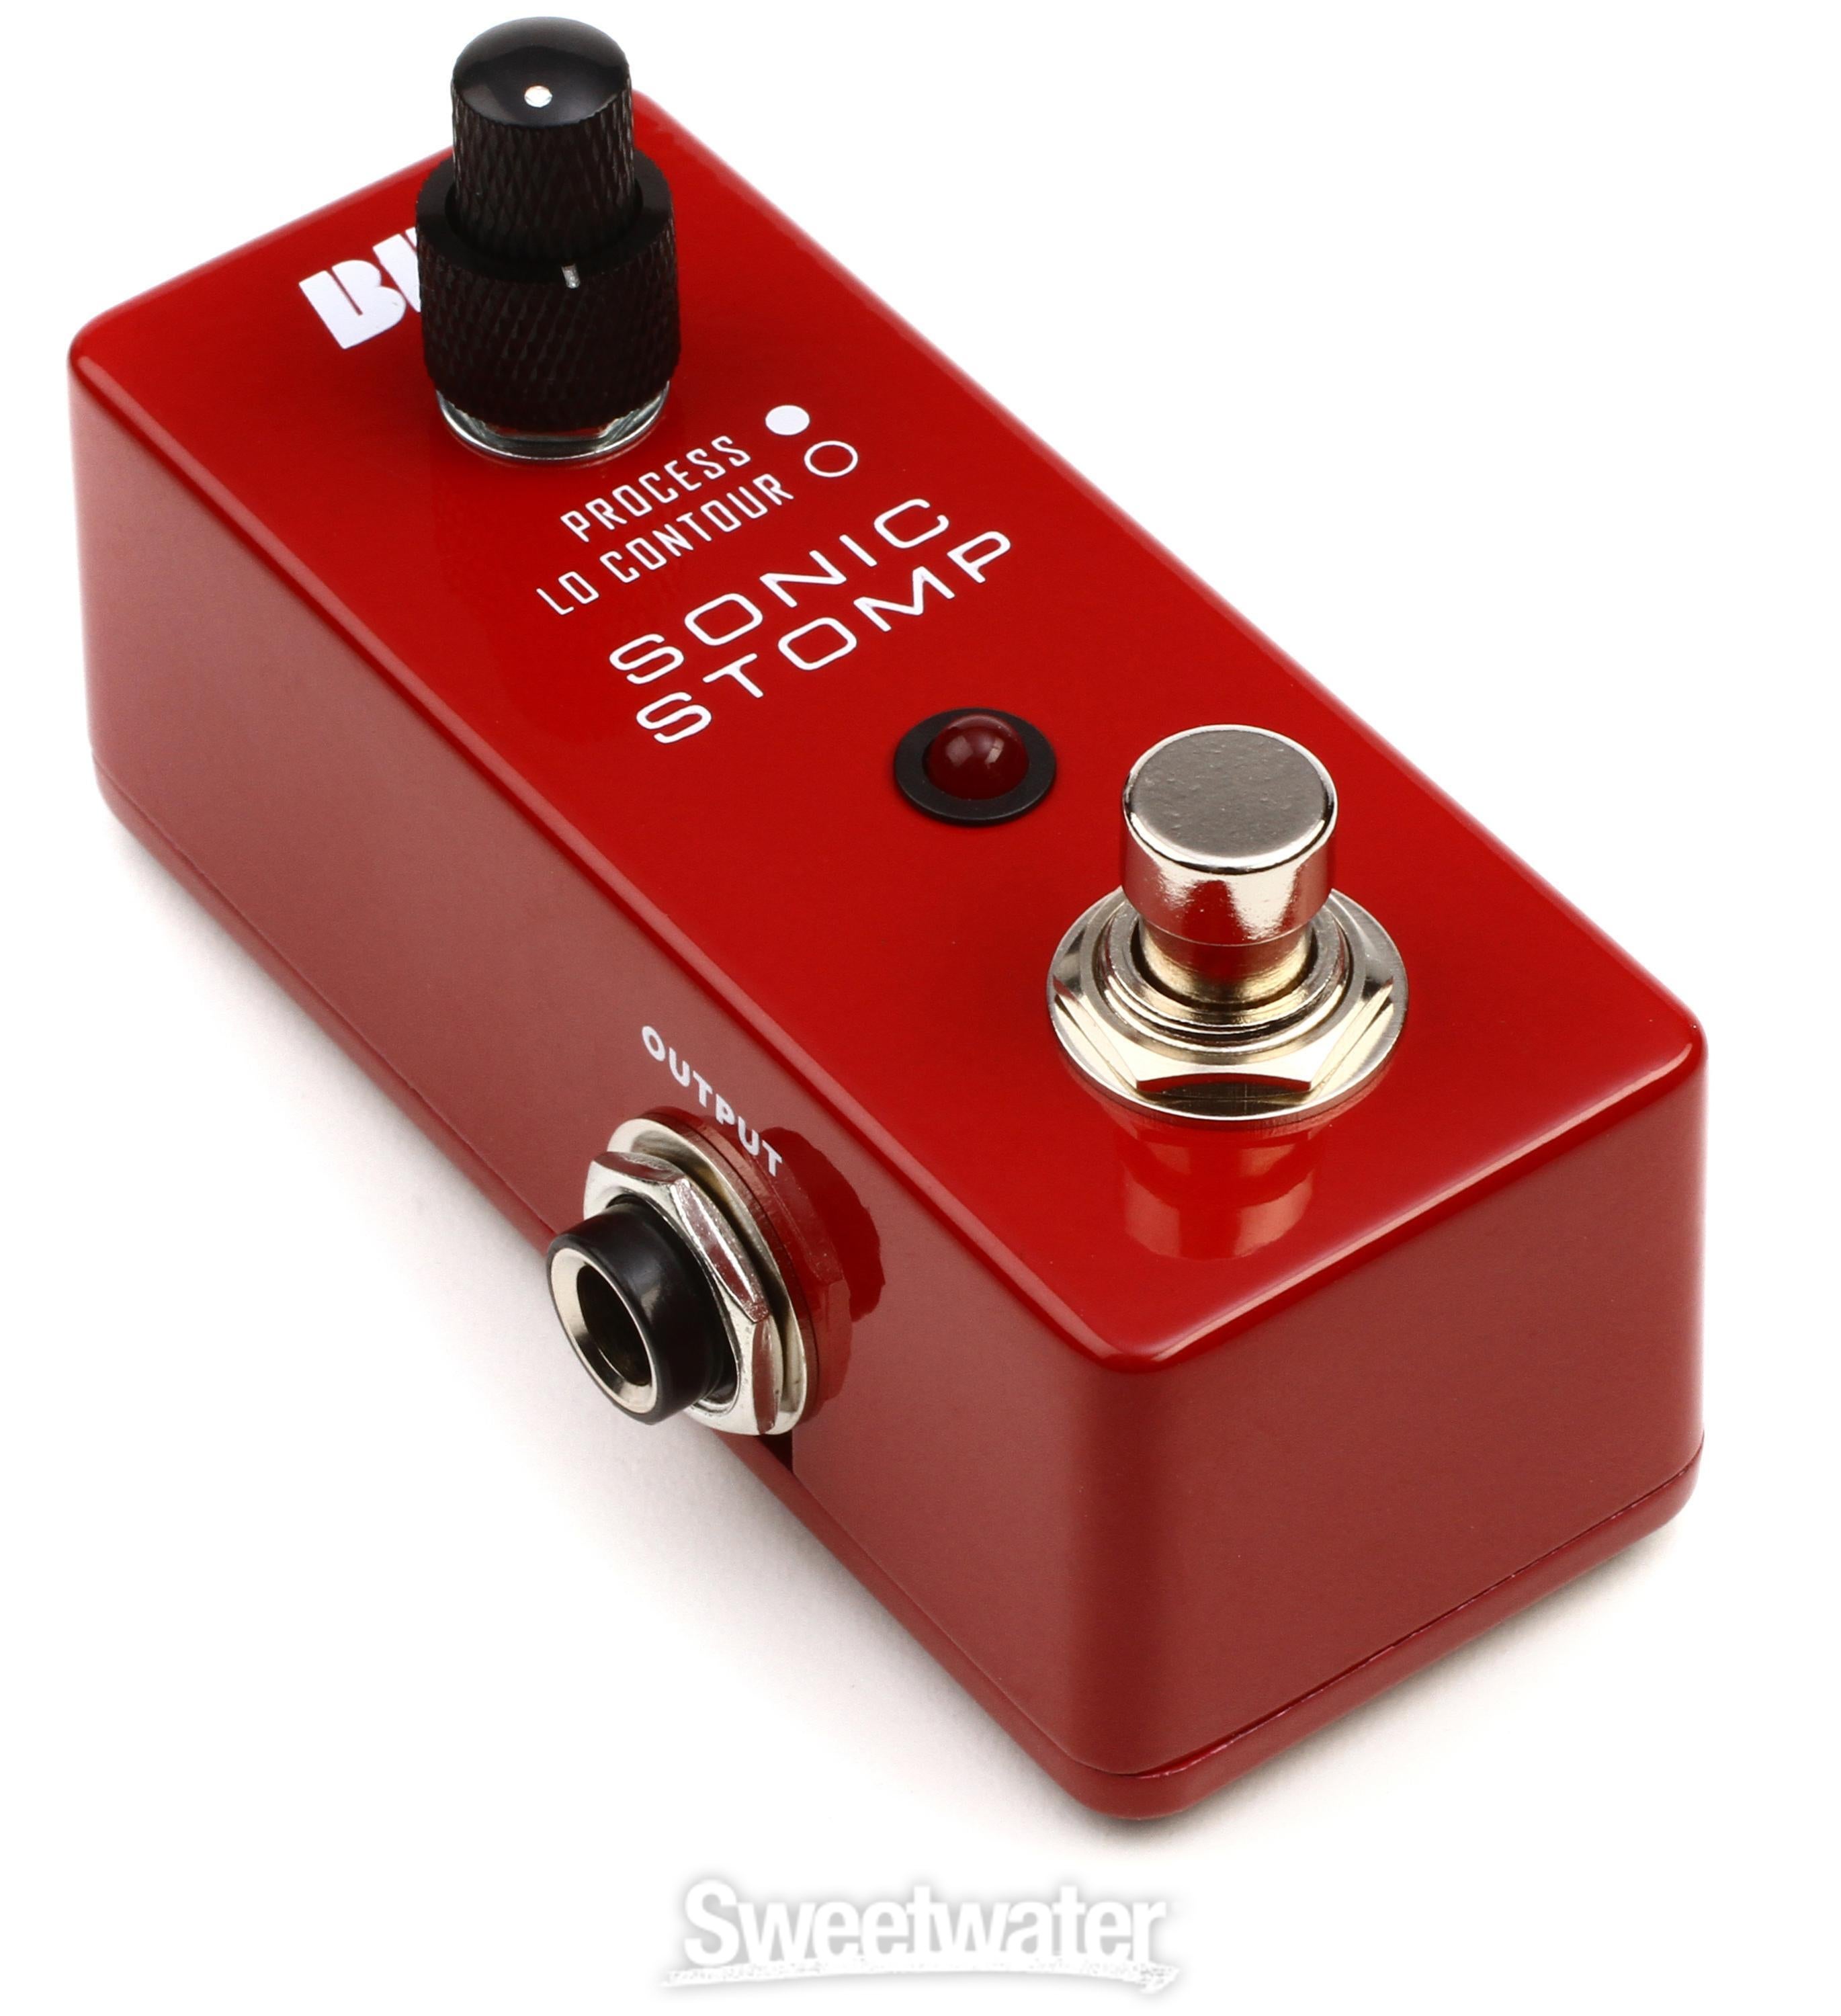 BBE MS-92 Mini Sonic Stomp Pedal Reviews | Sweetwater